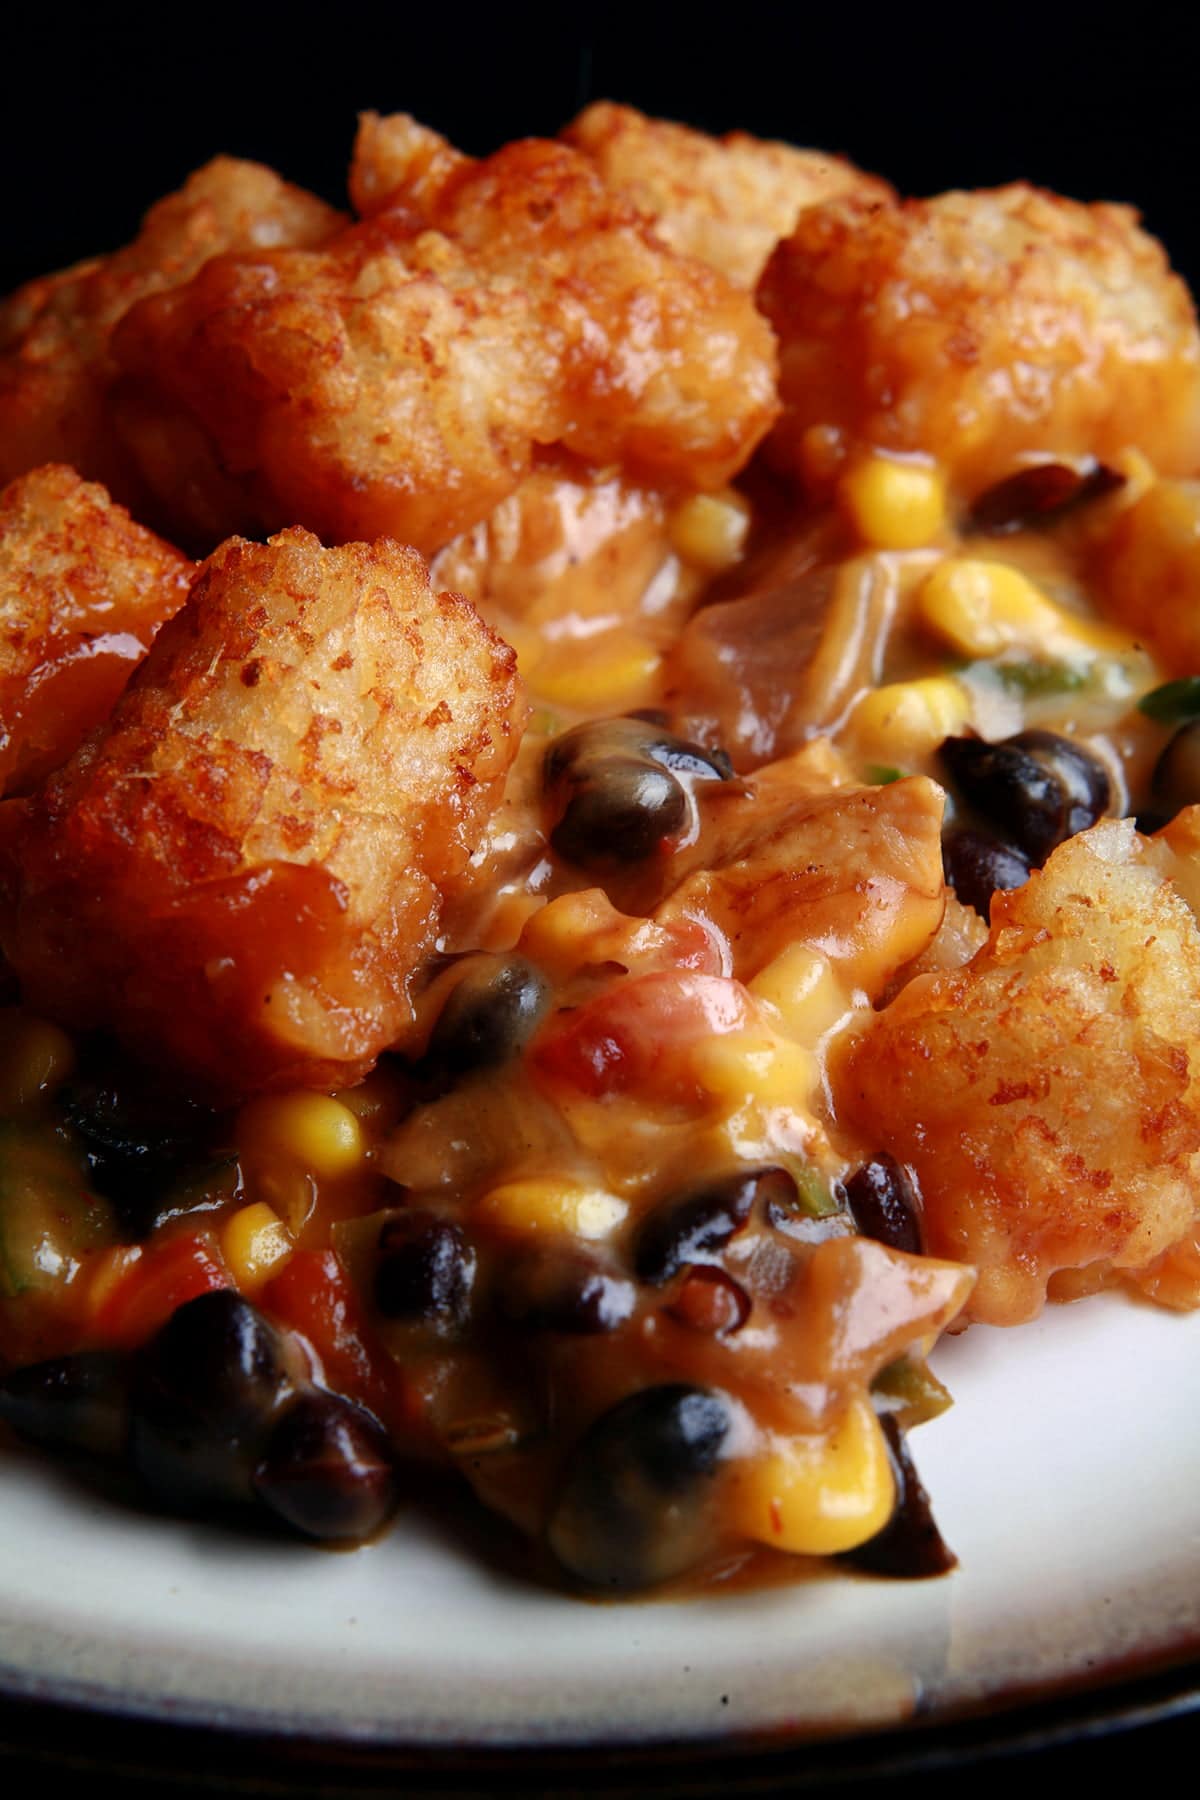 A close up view of a serving of southwest hot dish. Chicken, black beans, salsa, cheese sauce are visible, with crispy tater tots on top.